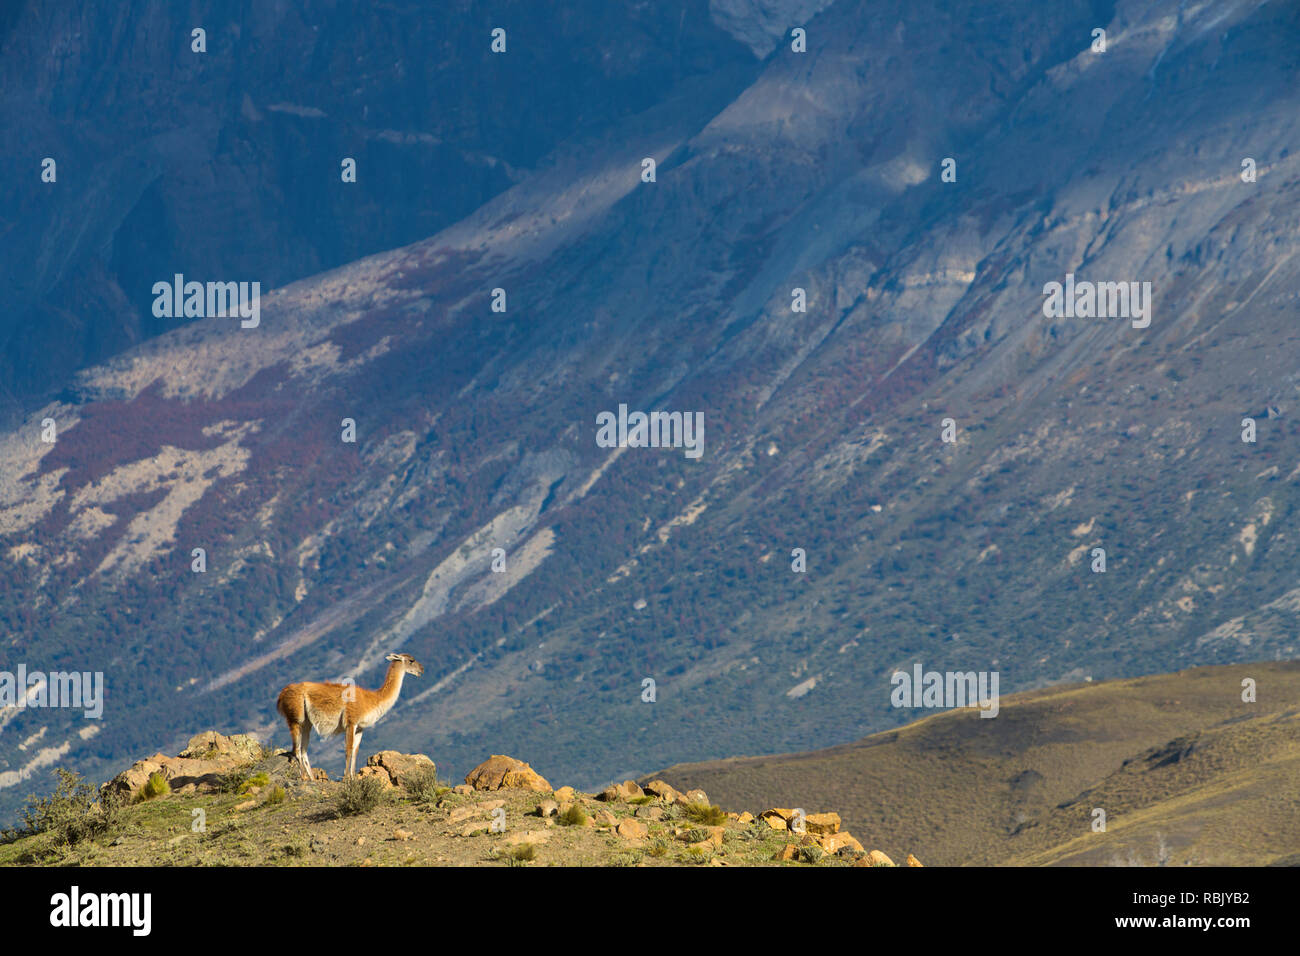 A Guanaco (Lama guanicoe) overlooks a valley in Torres Del Paine National Park of Chile. Wild Stock Photo